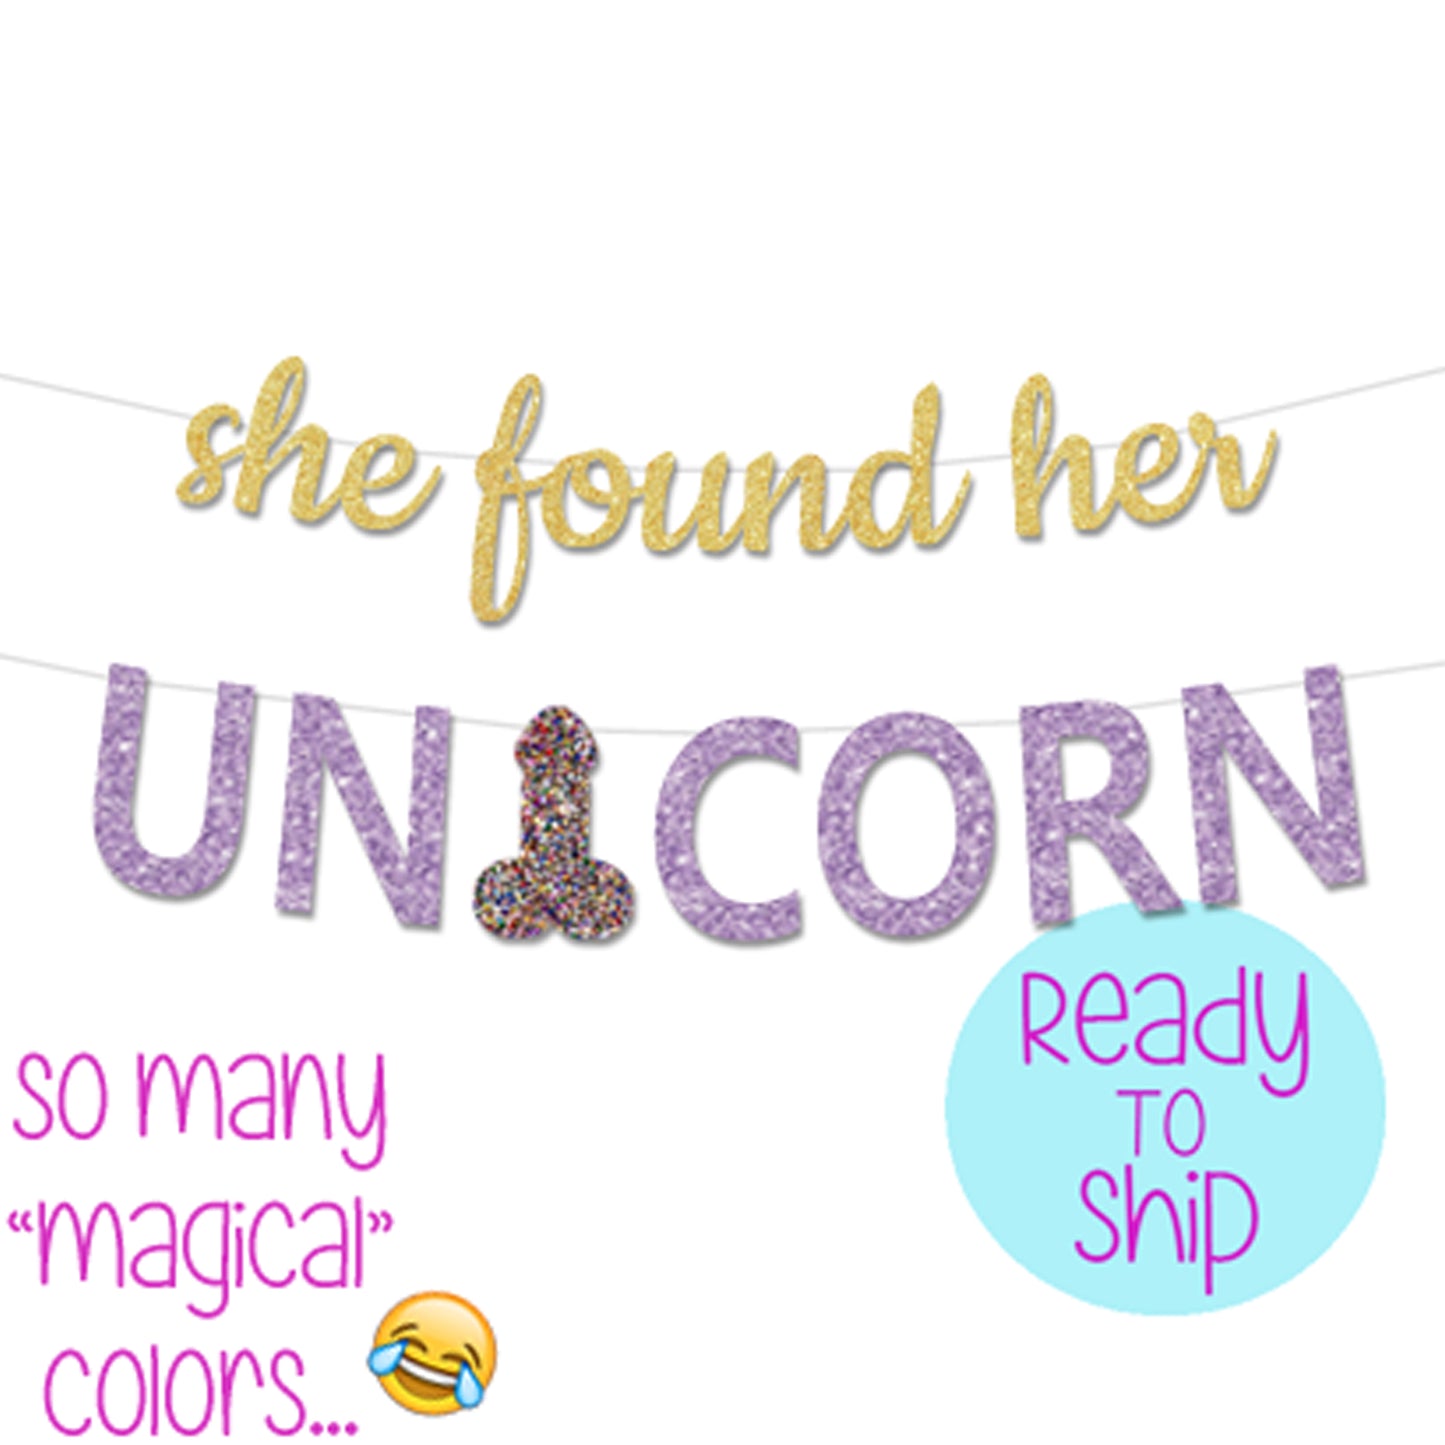 She Found Her Unicorn Bachelorette Party Penis Banner